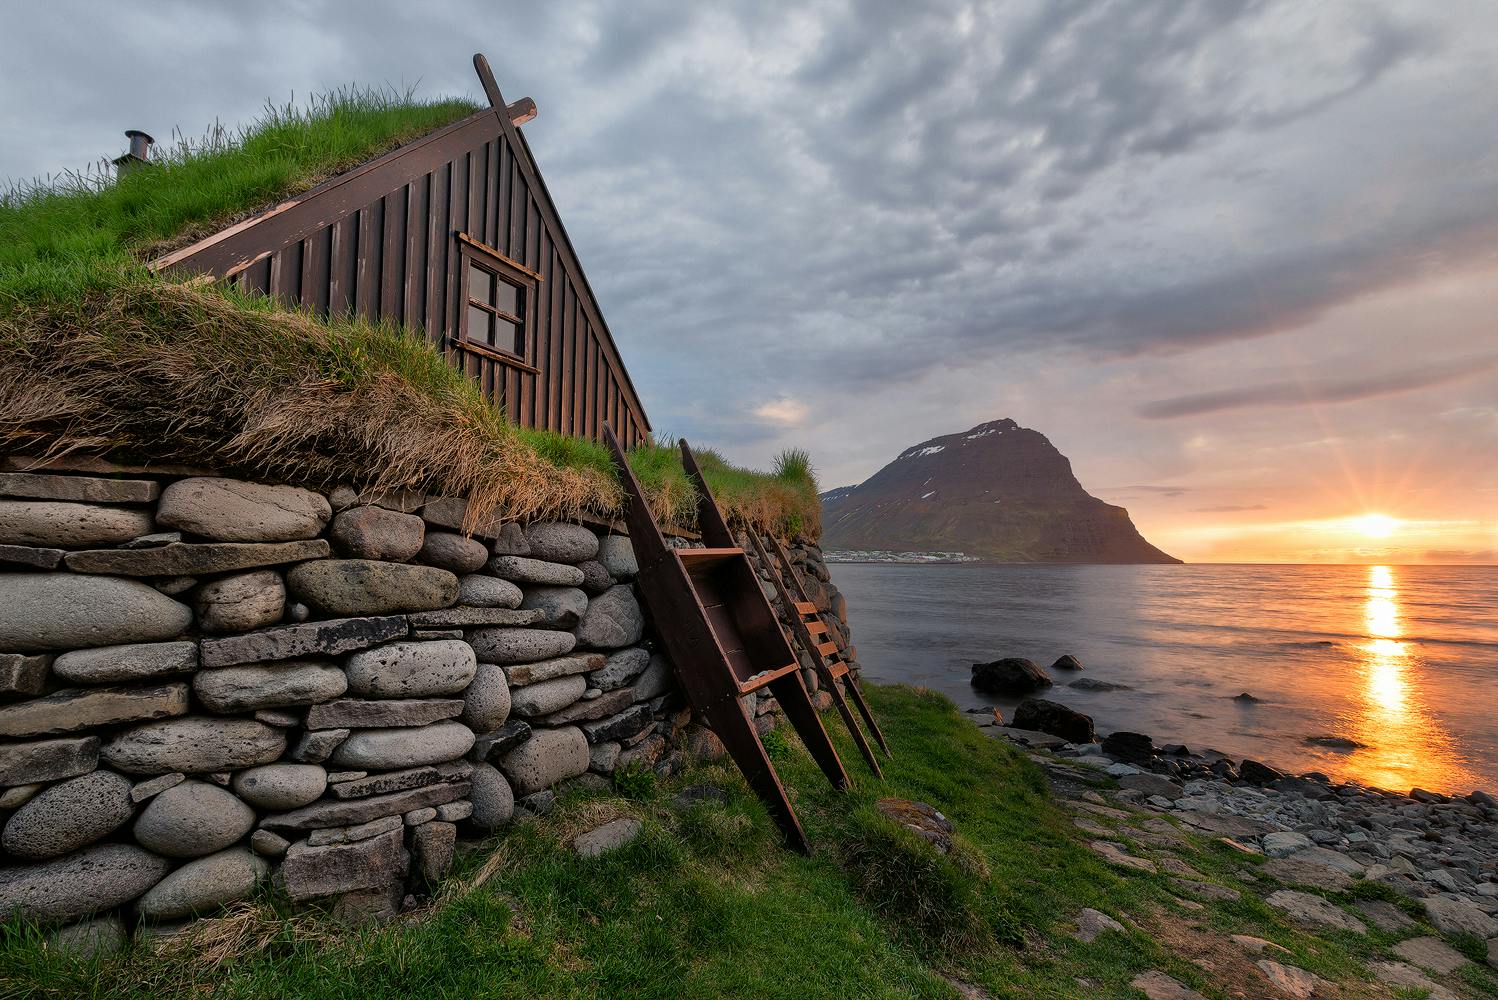 The Westfjords is one of the least populated regions in Iceland.